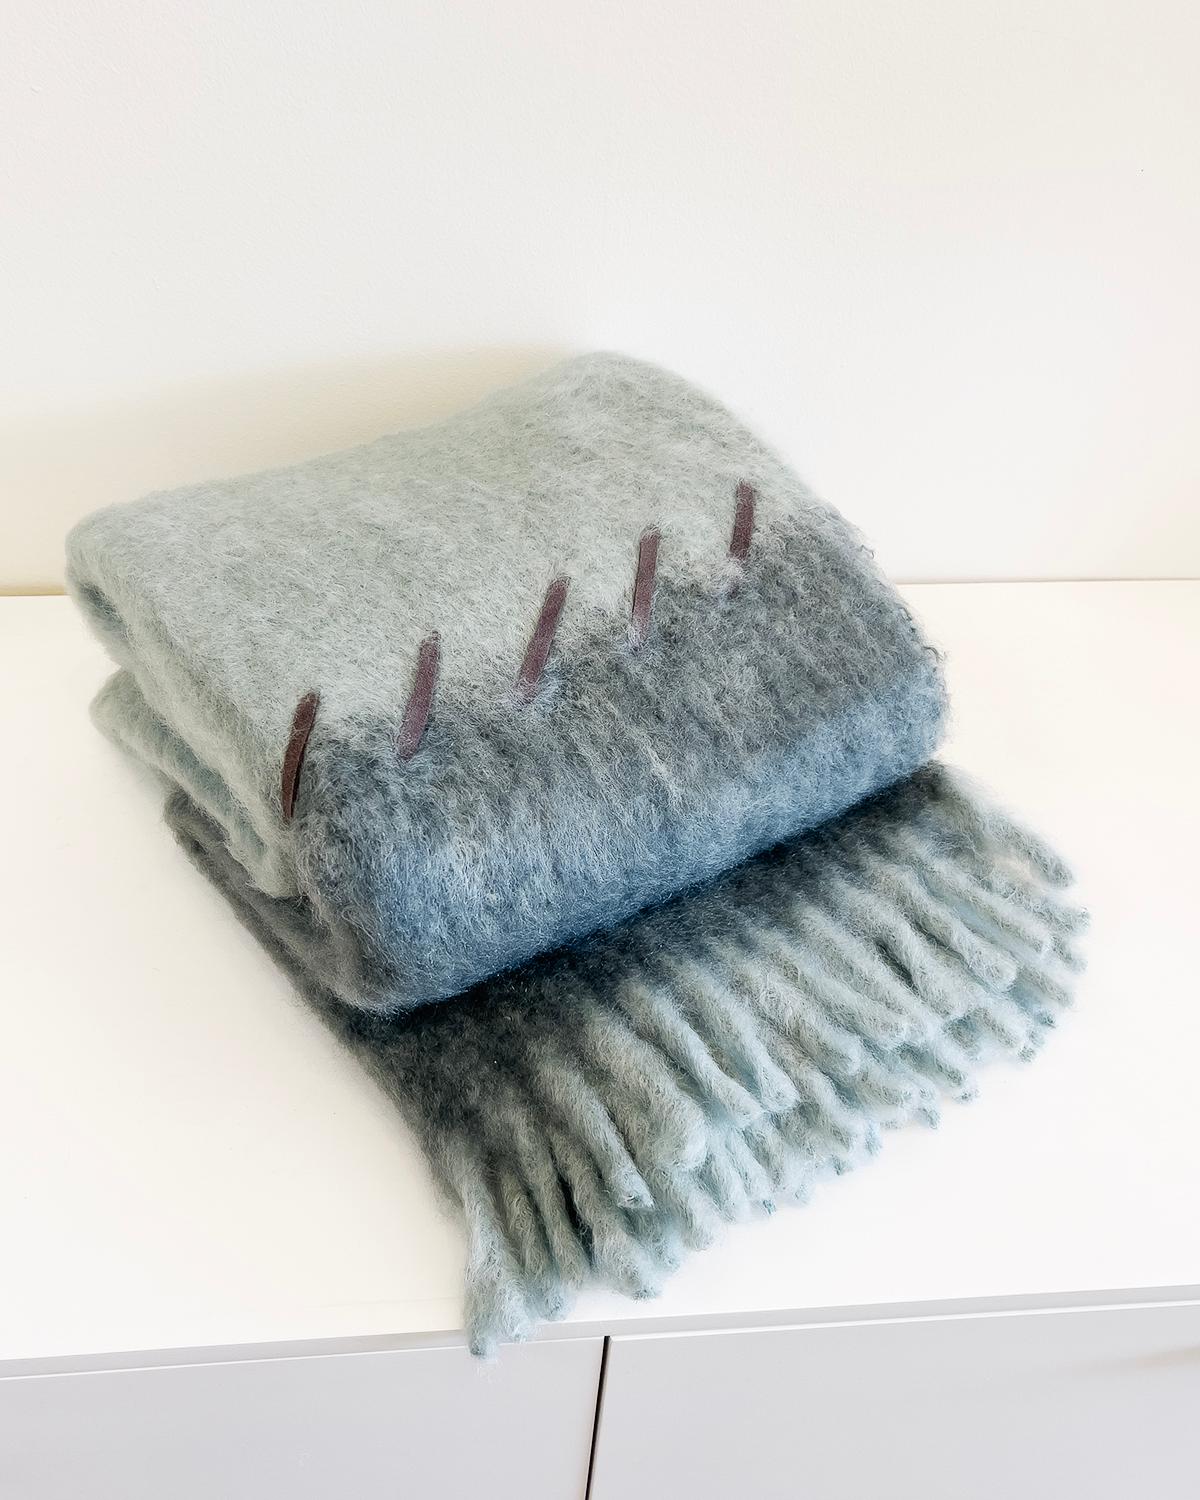 Hand-Woven Mantas Ezcaray Marine Blue and Seafoam Mohair Blanket Throw w/ Suede Whipstitch